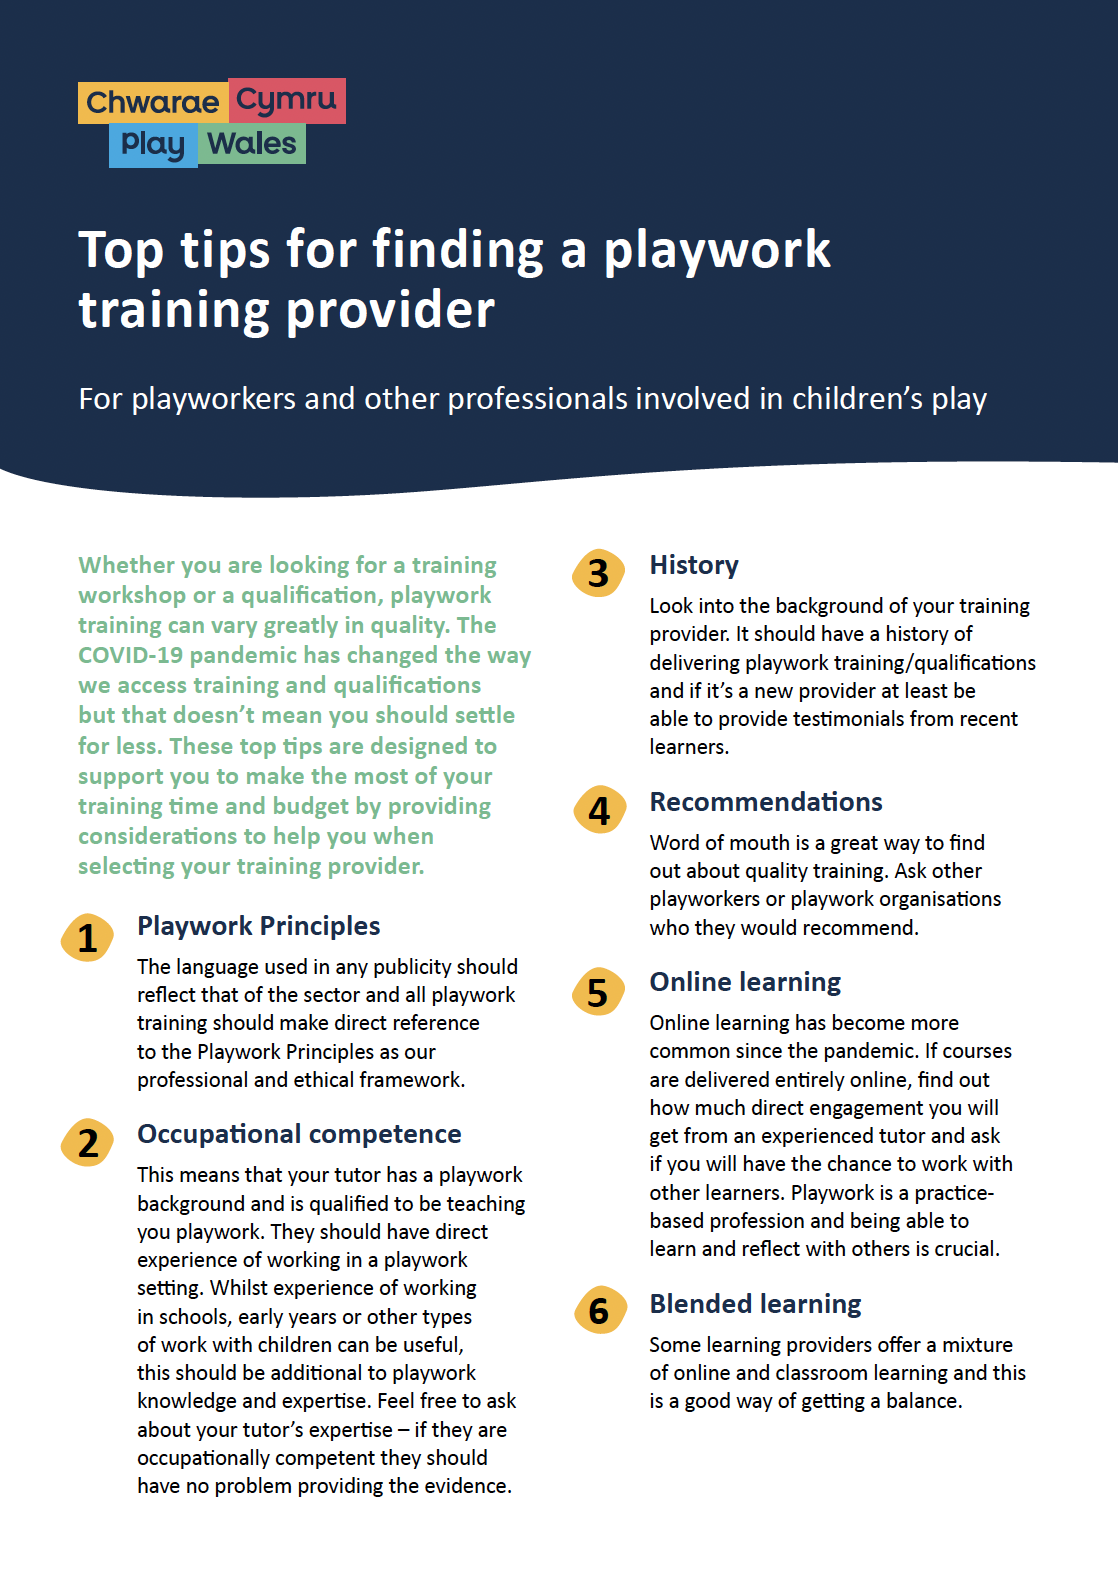 Top tips for finding a playwork training provider